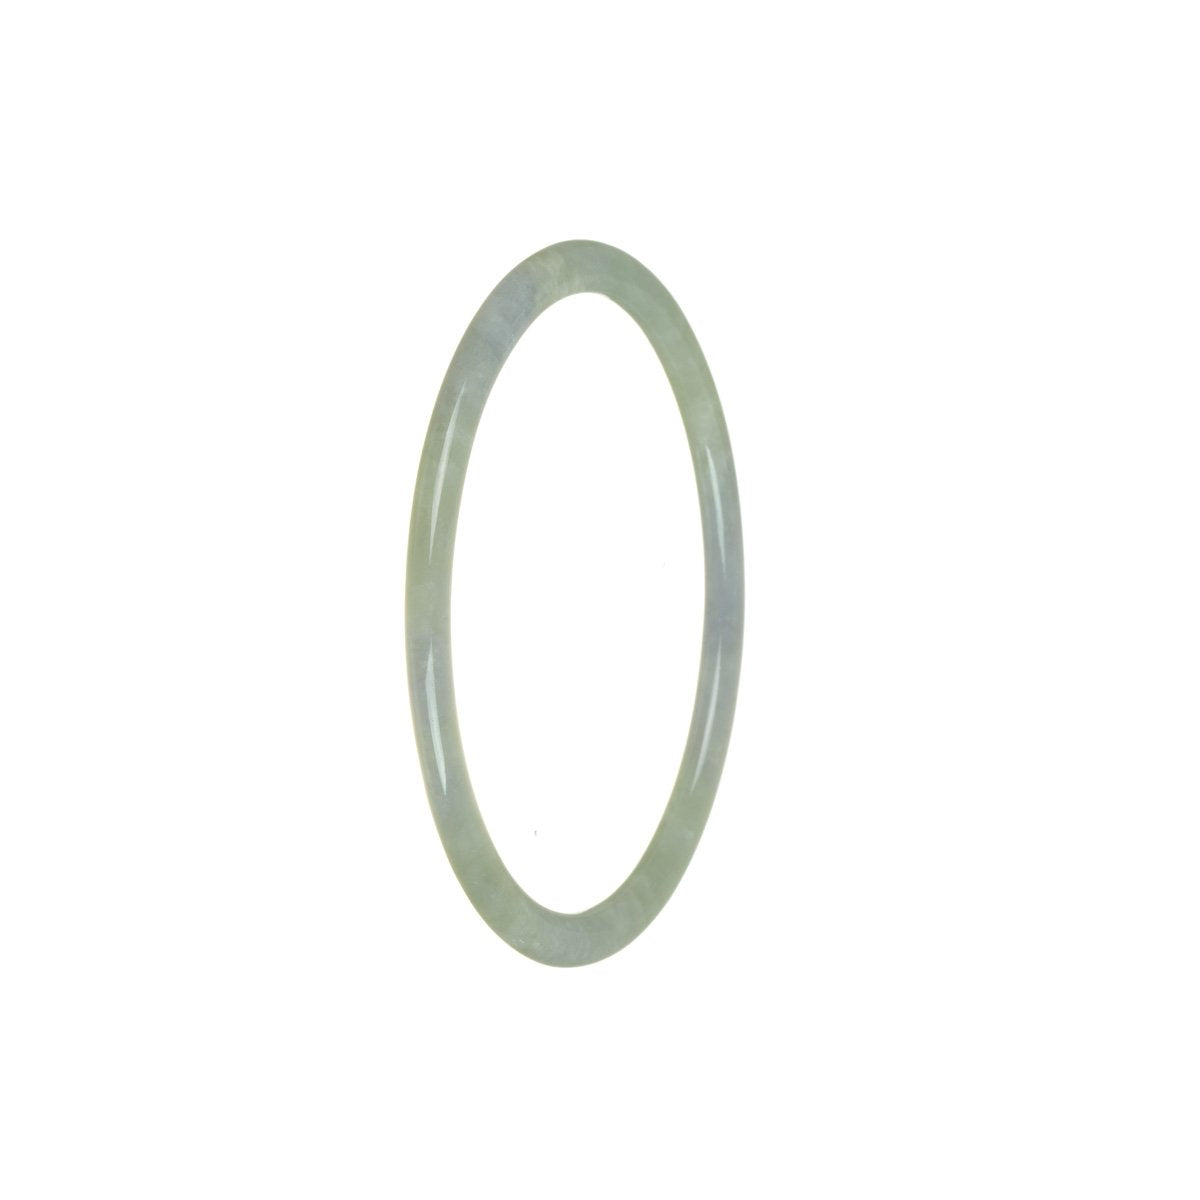 A thin, 58mm Burmese jade bangle with a beautiful natural green color and hints of lavender.